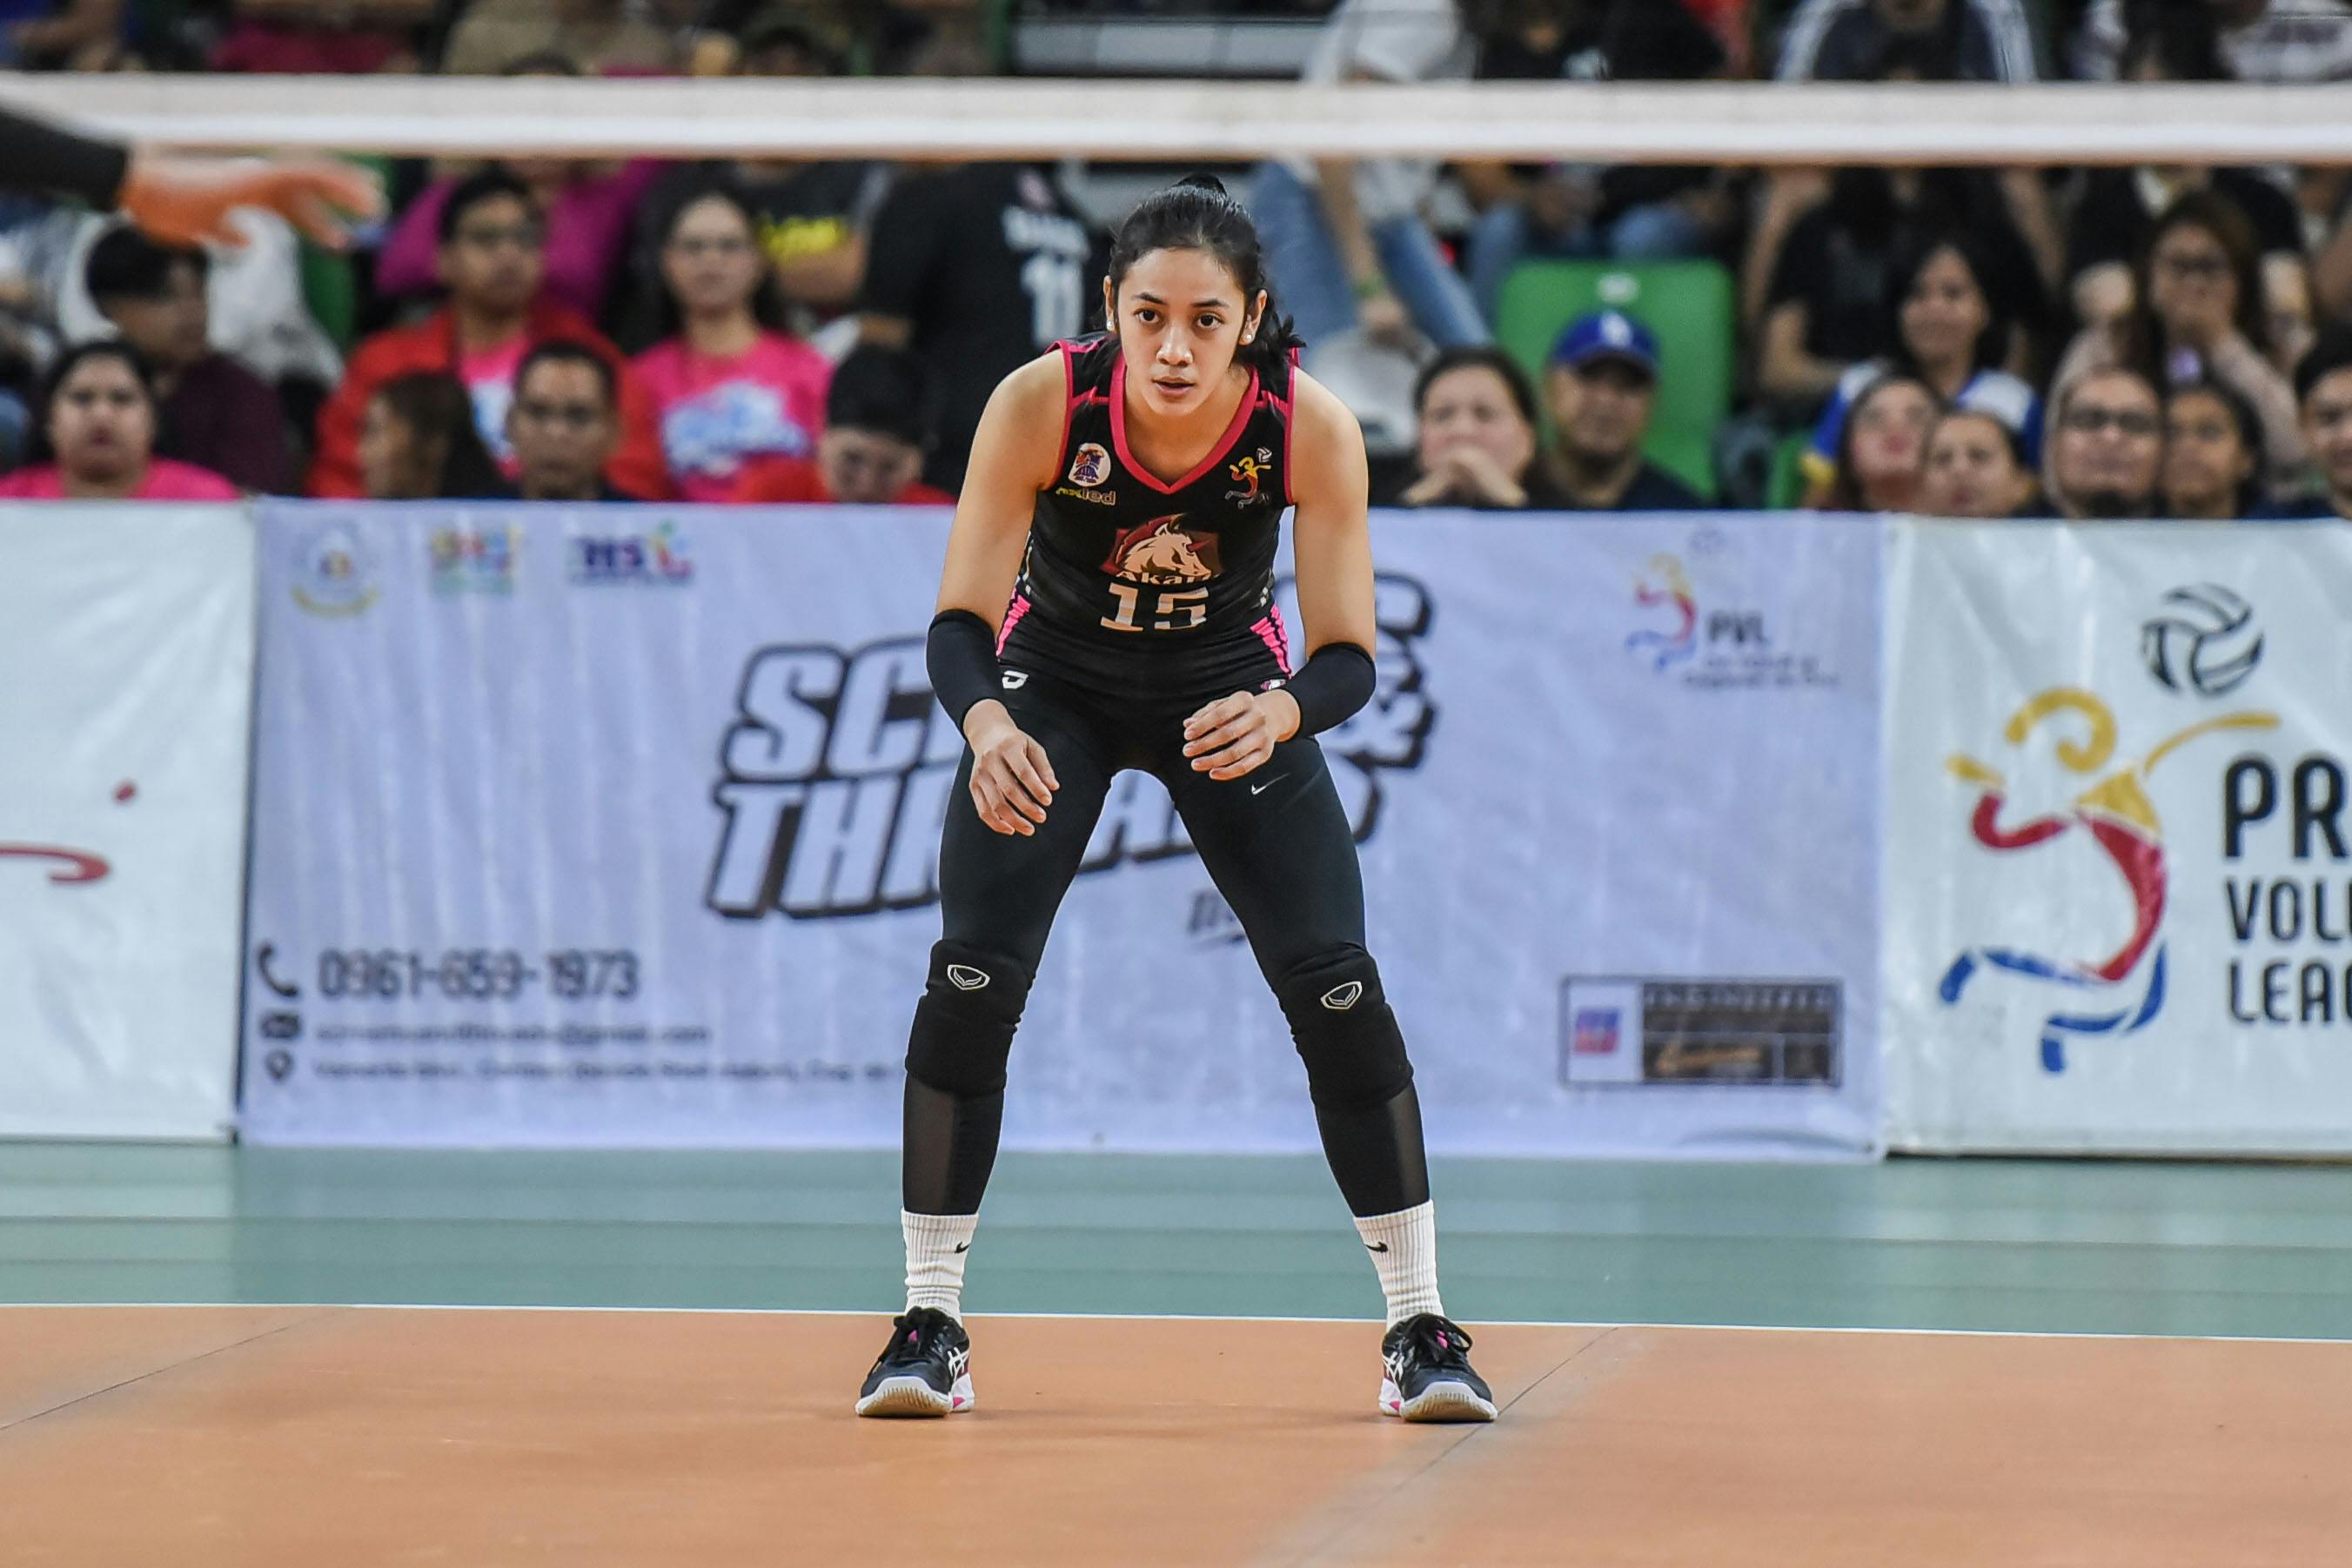 PVL: Justine Jazareno is all charged up with love from Akari Chargers